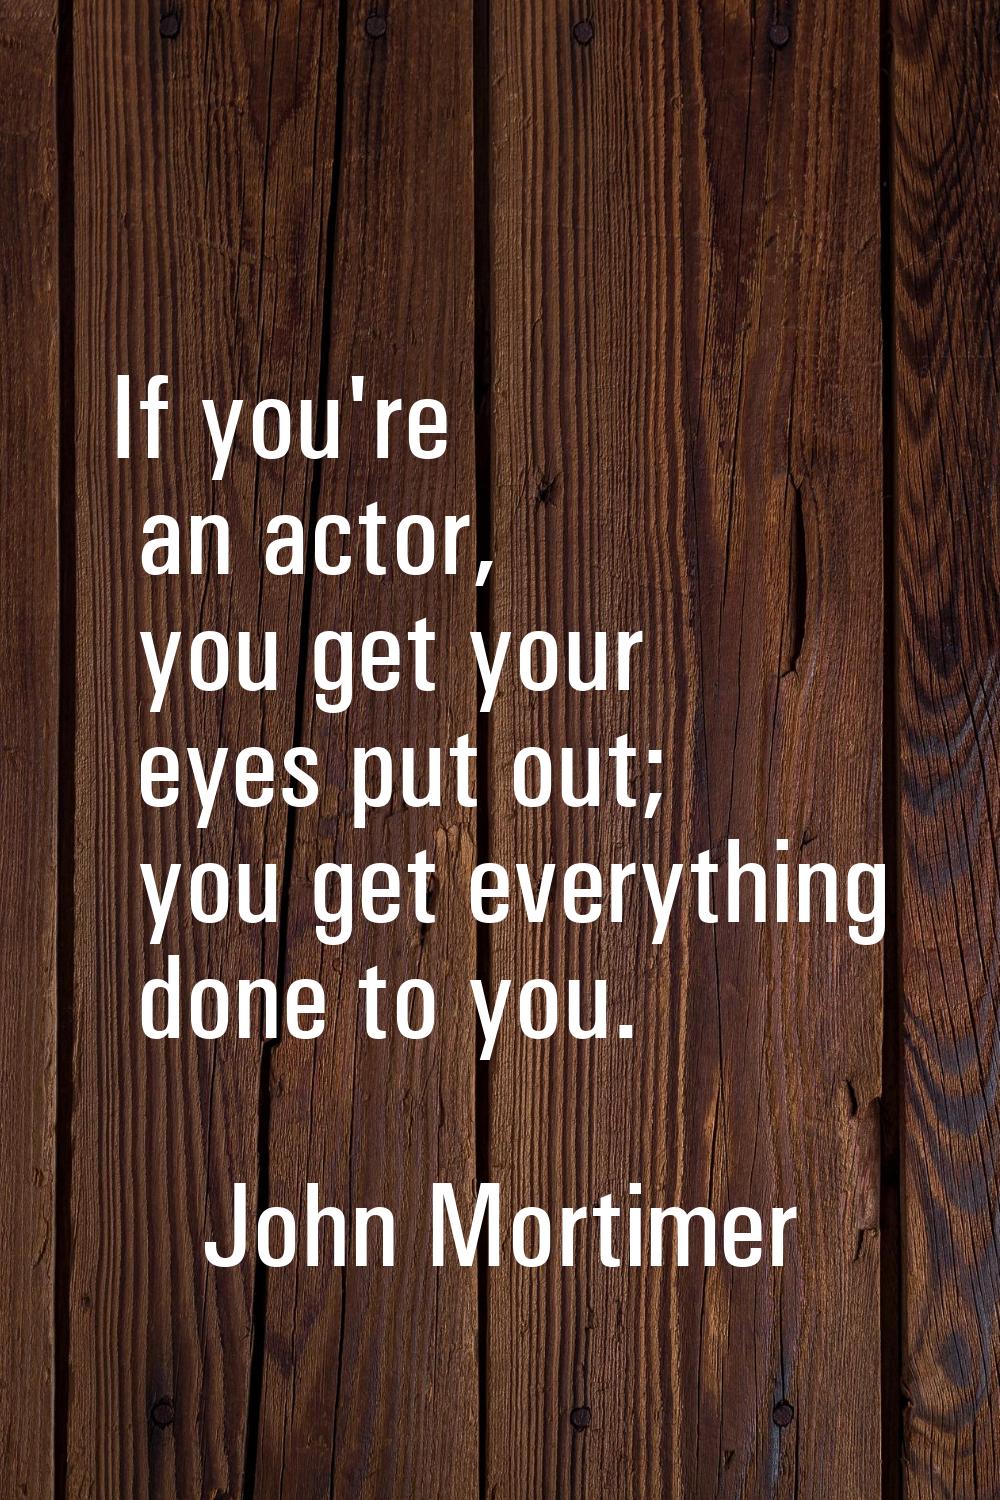 If you're an actor, you get your eyes put out; you get everything done to you.